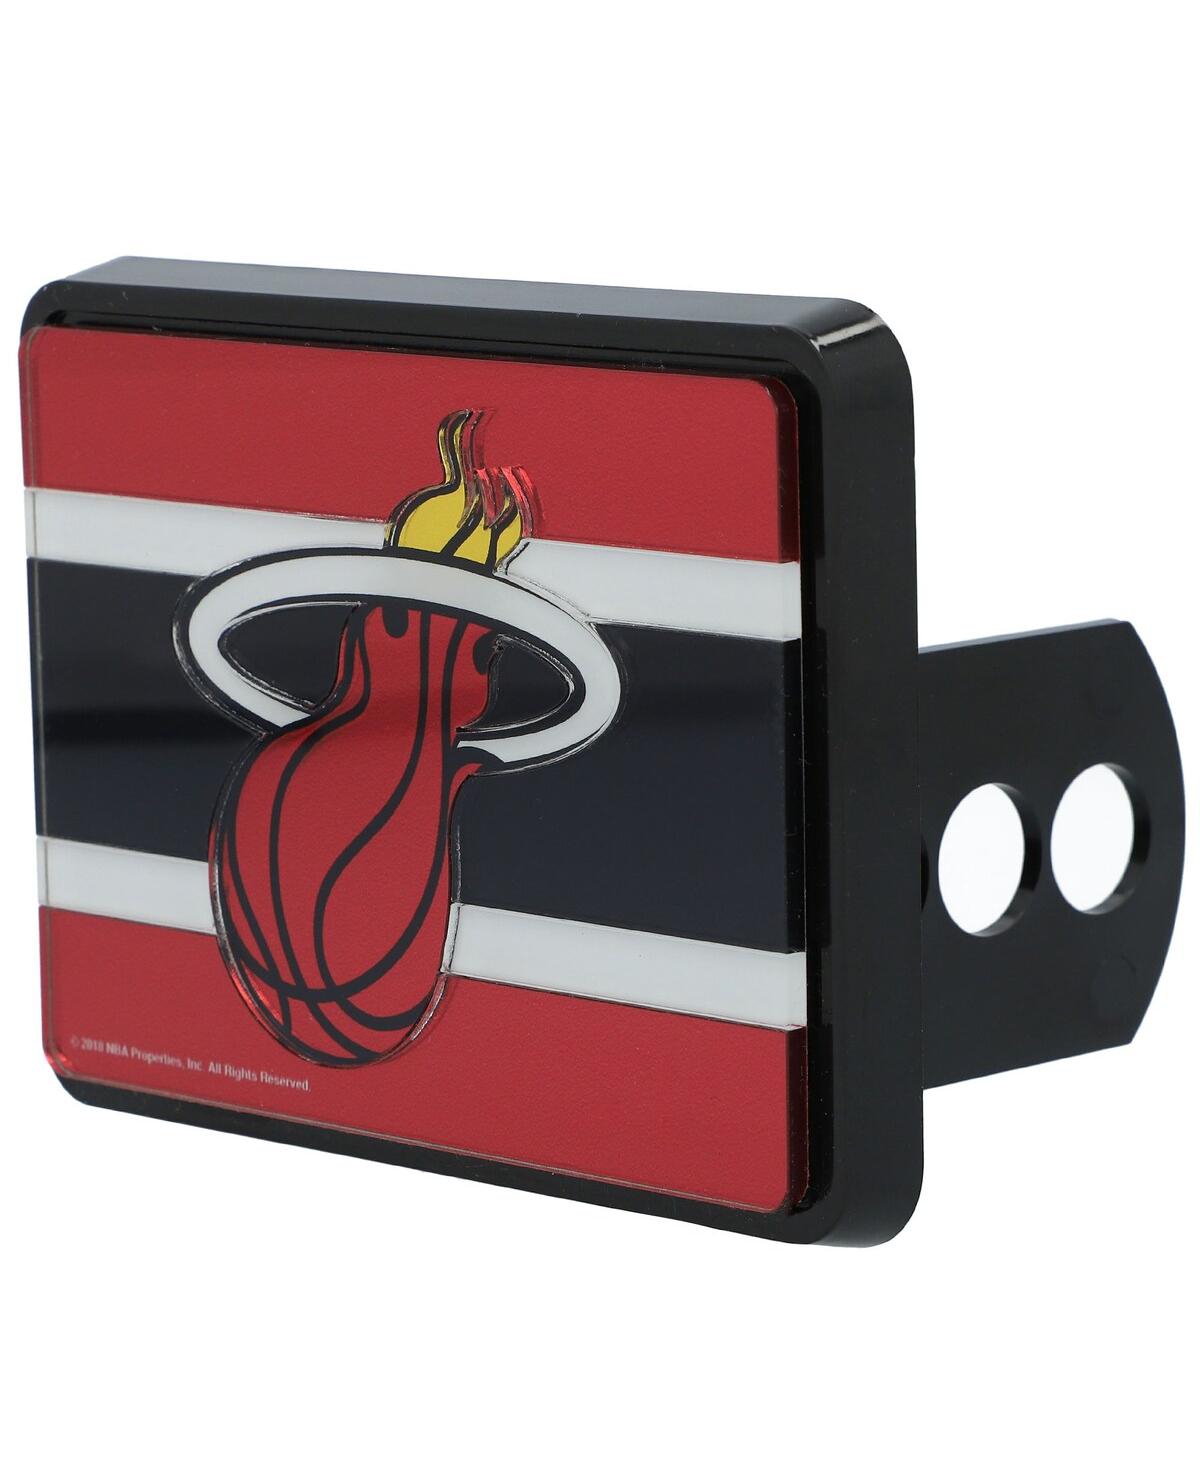 Miami Heat Universal Rectangle Hitch Cover - Red, Black